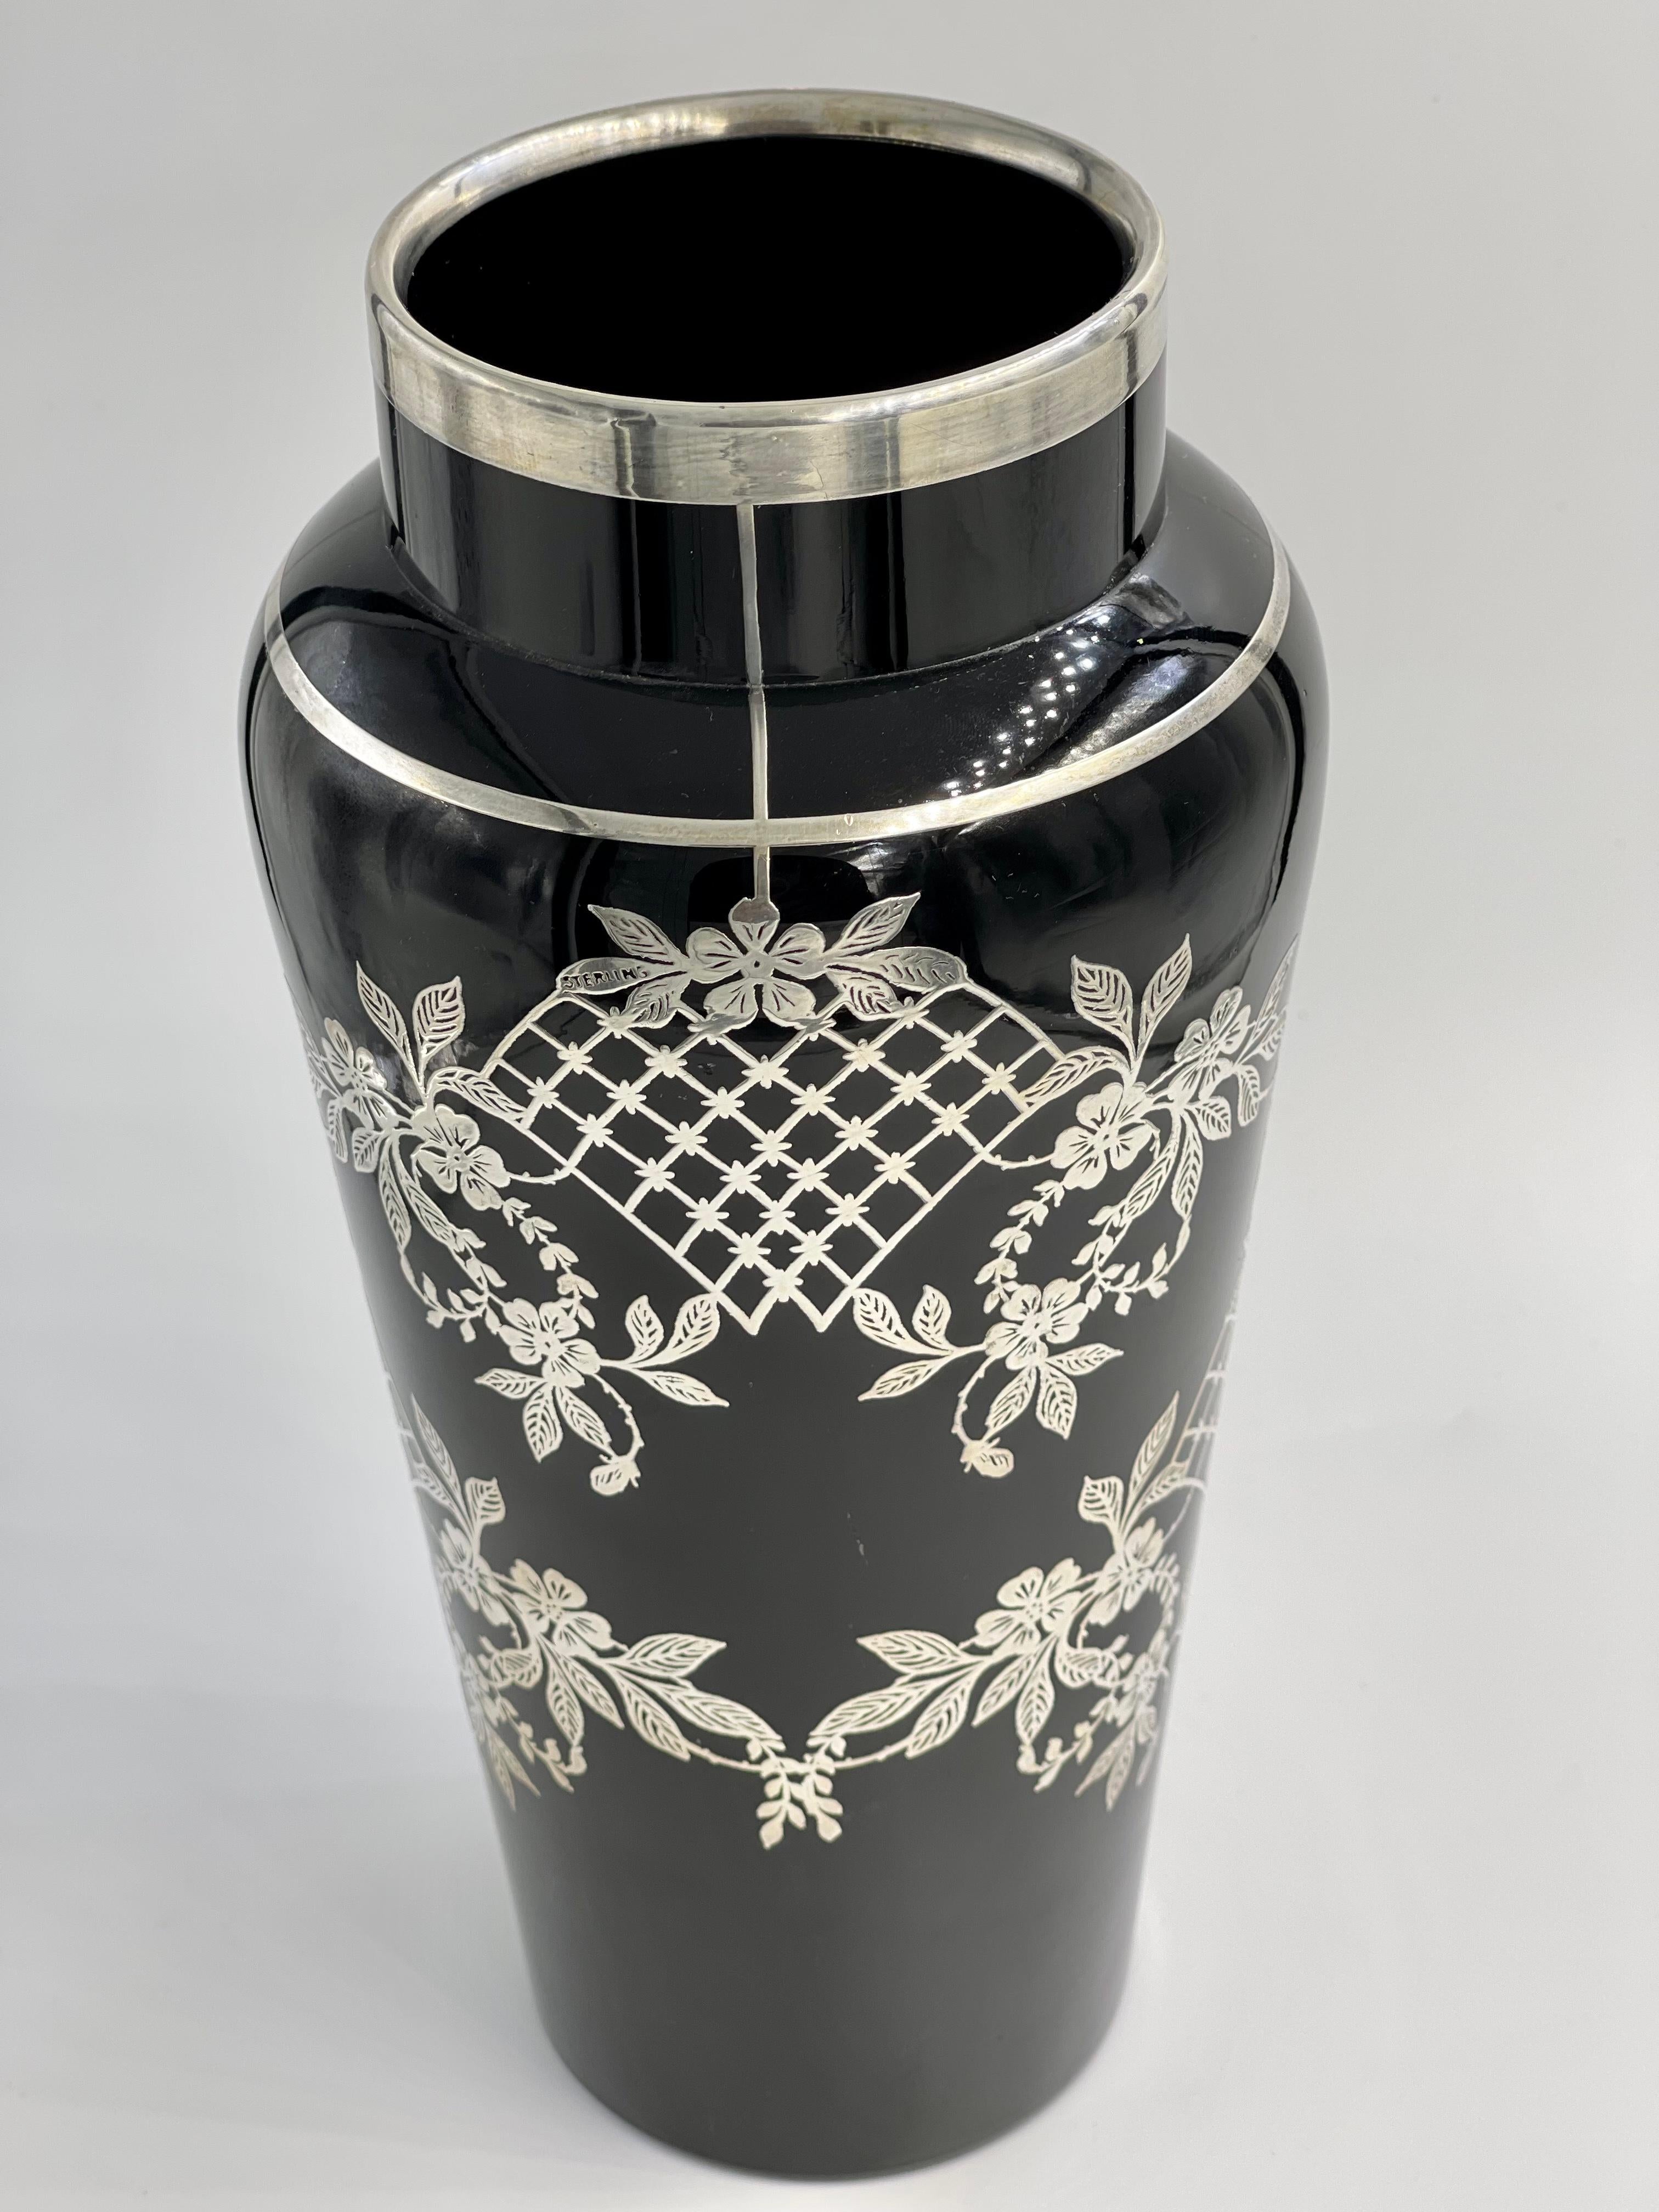 Lattice Flower Floral Sterling Silver Overlay Black Amethyst Glass Vase In Good Condition For Sale In Miami Beach, FL